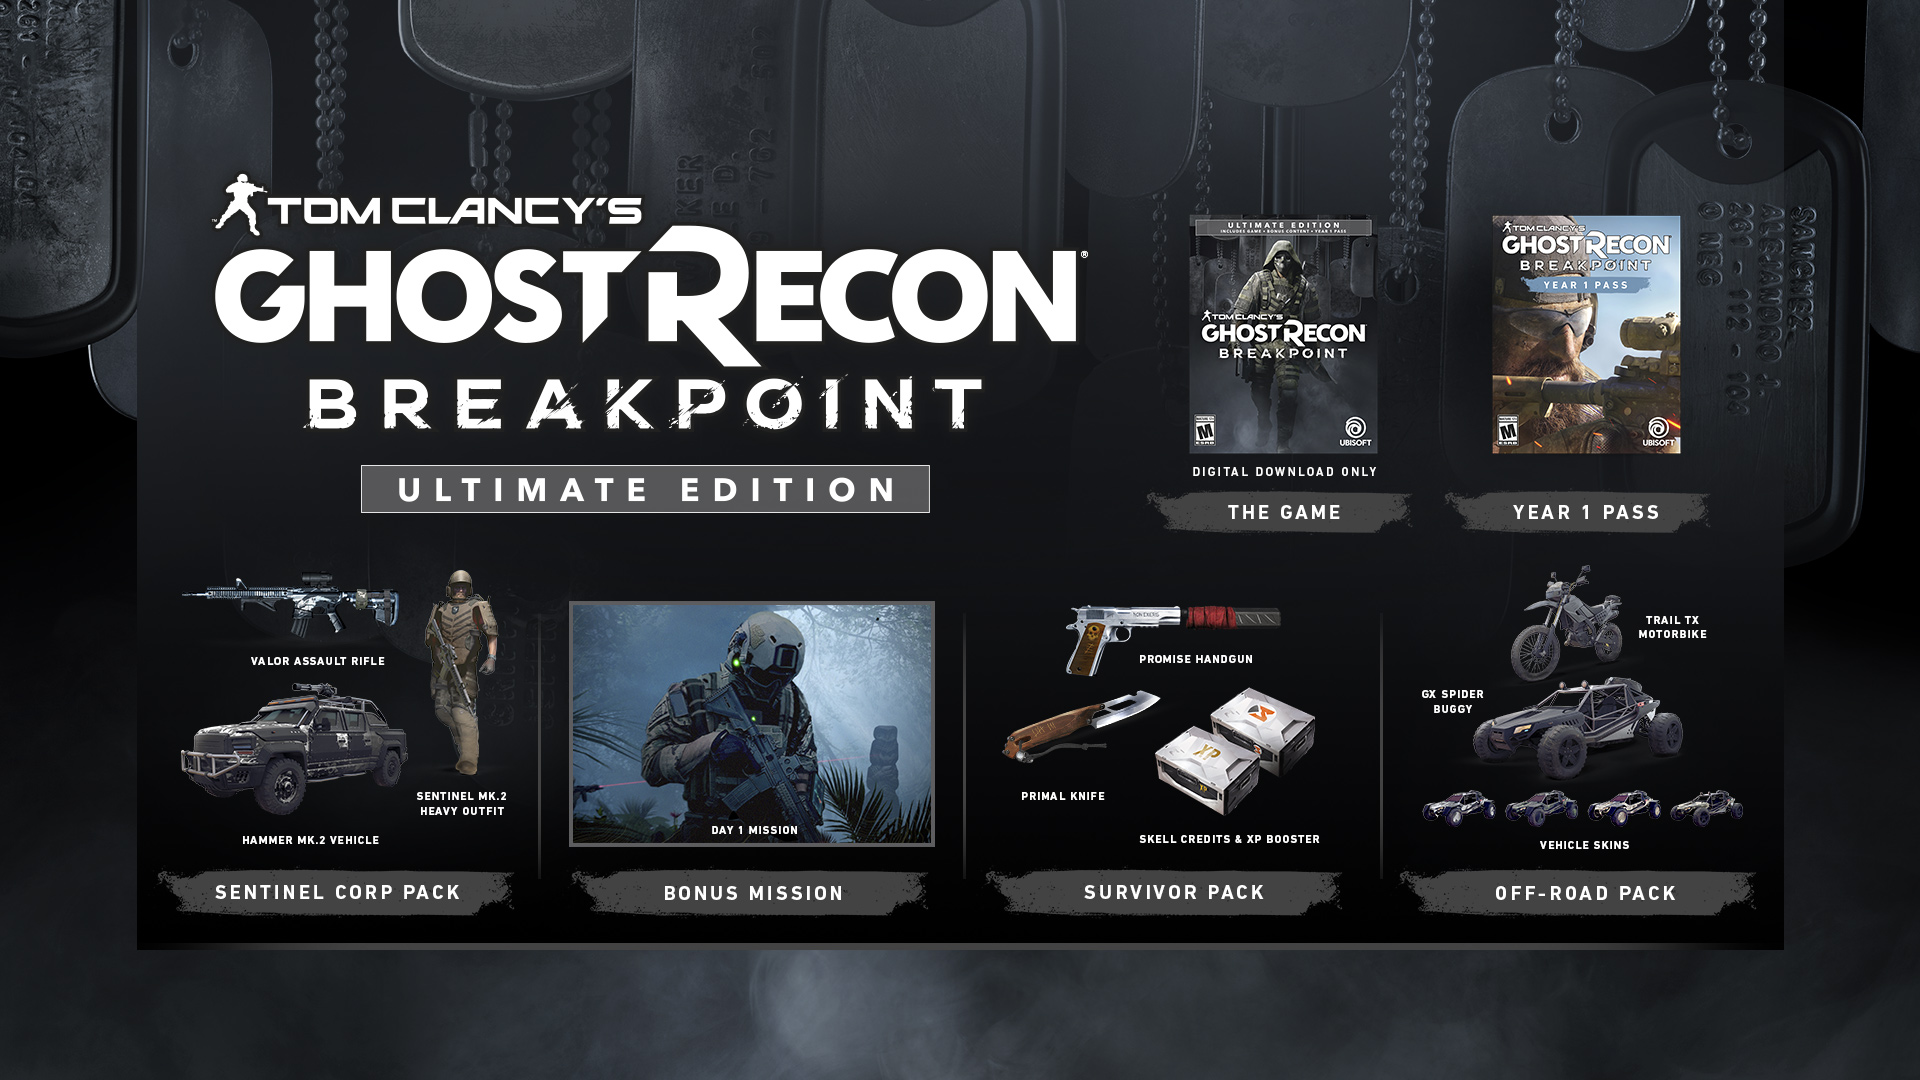 Overlord 3 1 ghost recon breakpoint. Tom Clancy's breakpoint ps4. Ghost Recon breakpoint Ultimate Edition. Tom Clancy's Ghost Recon breakpoint Ultimate Edition ps4. Ghost Recon breakpoint ps4.